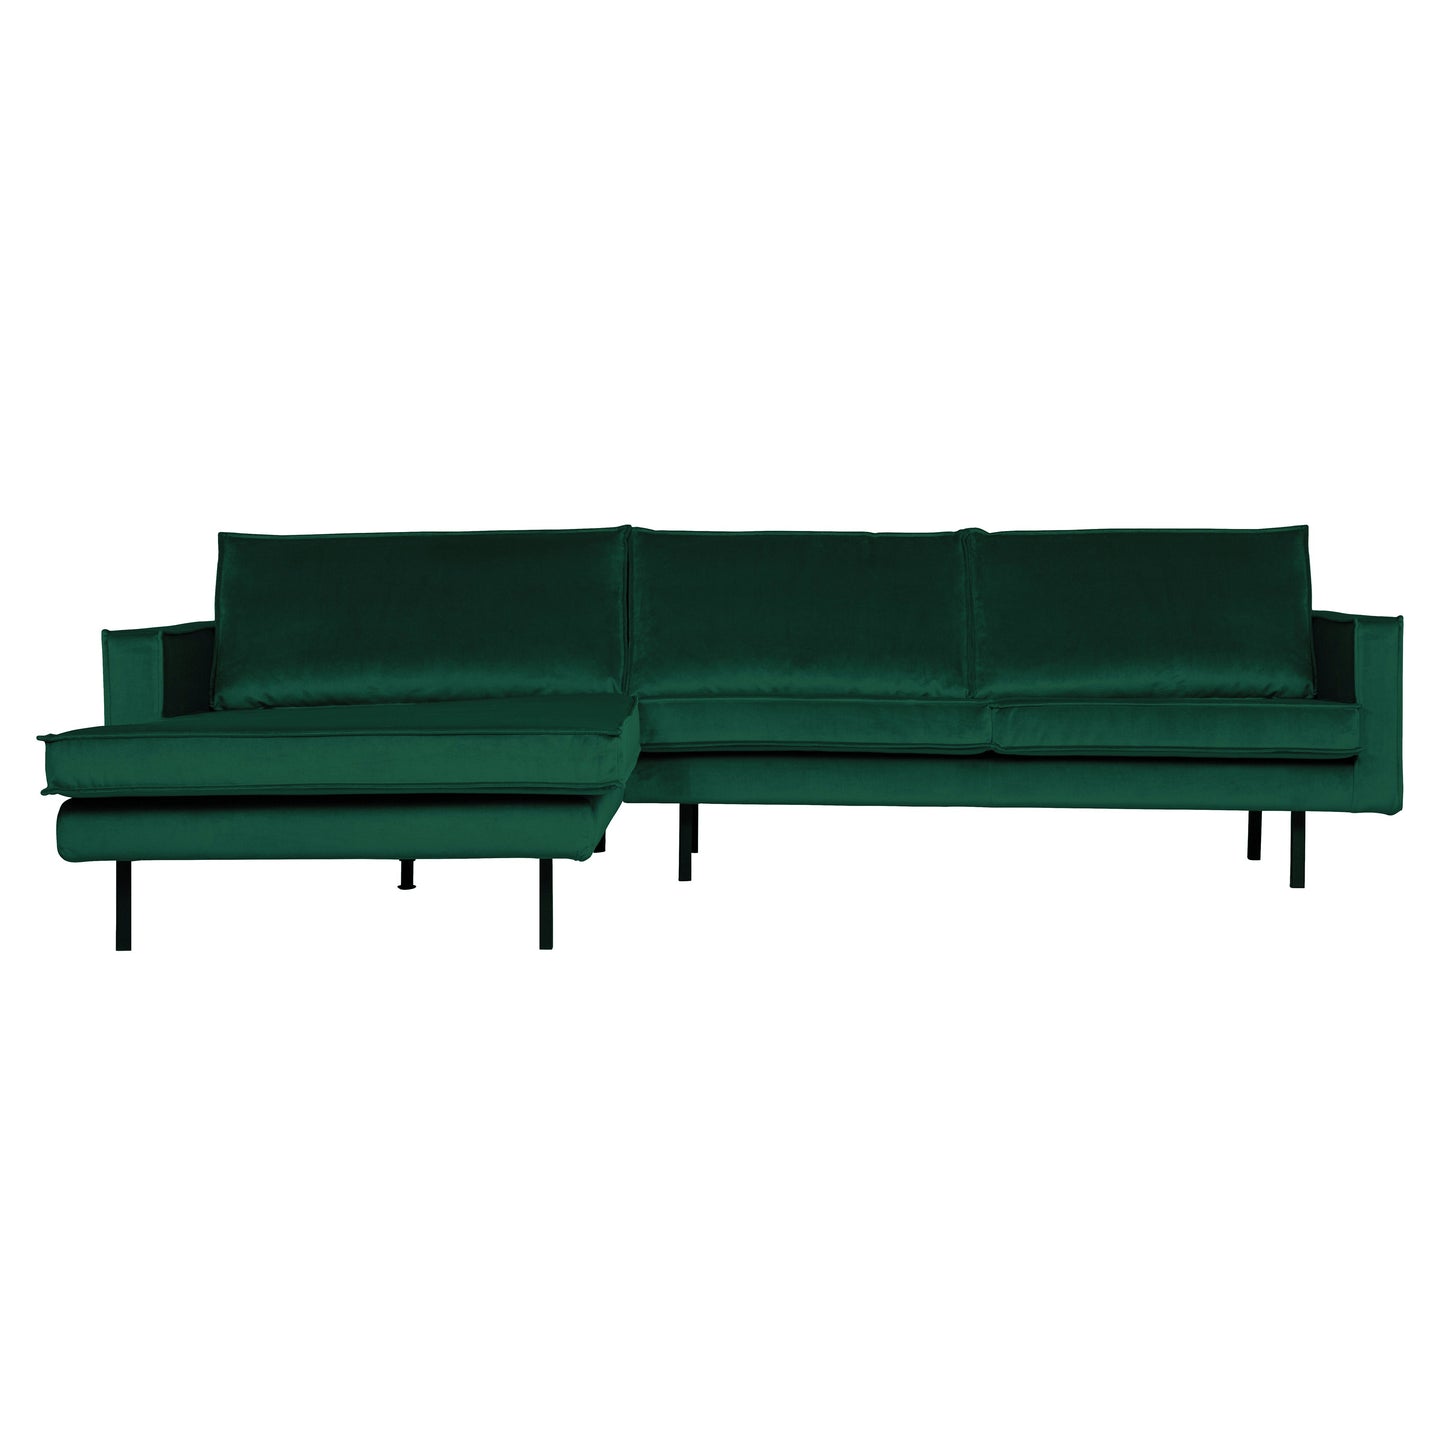 BEPUREHOME | Rodeo - Chaiselongue, links, Velour Green Forest